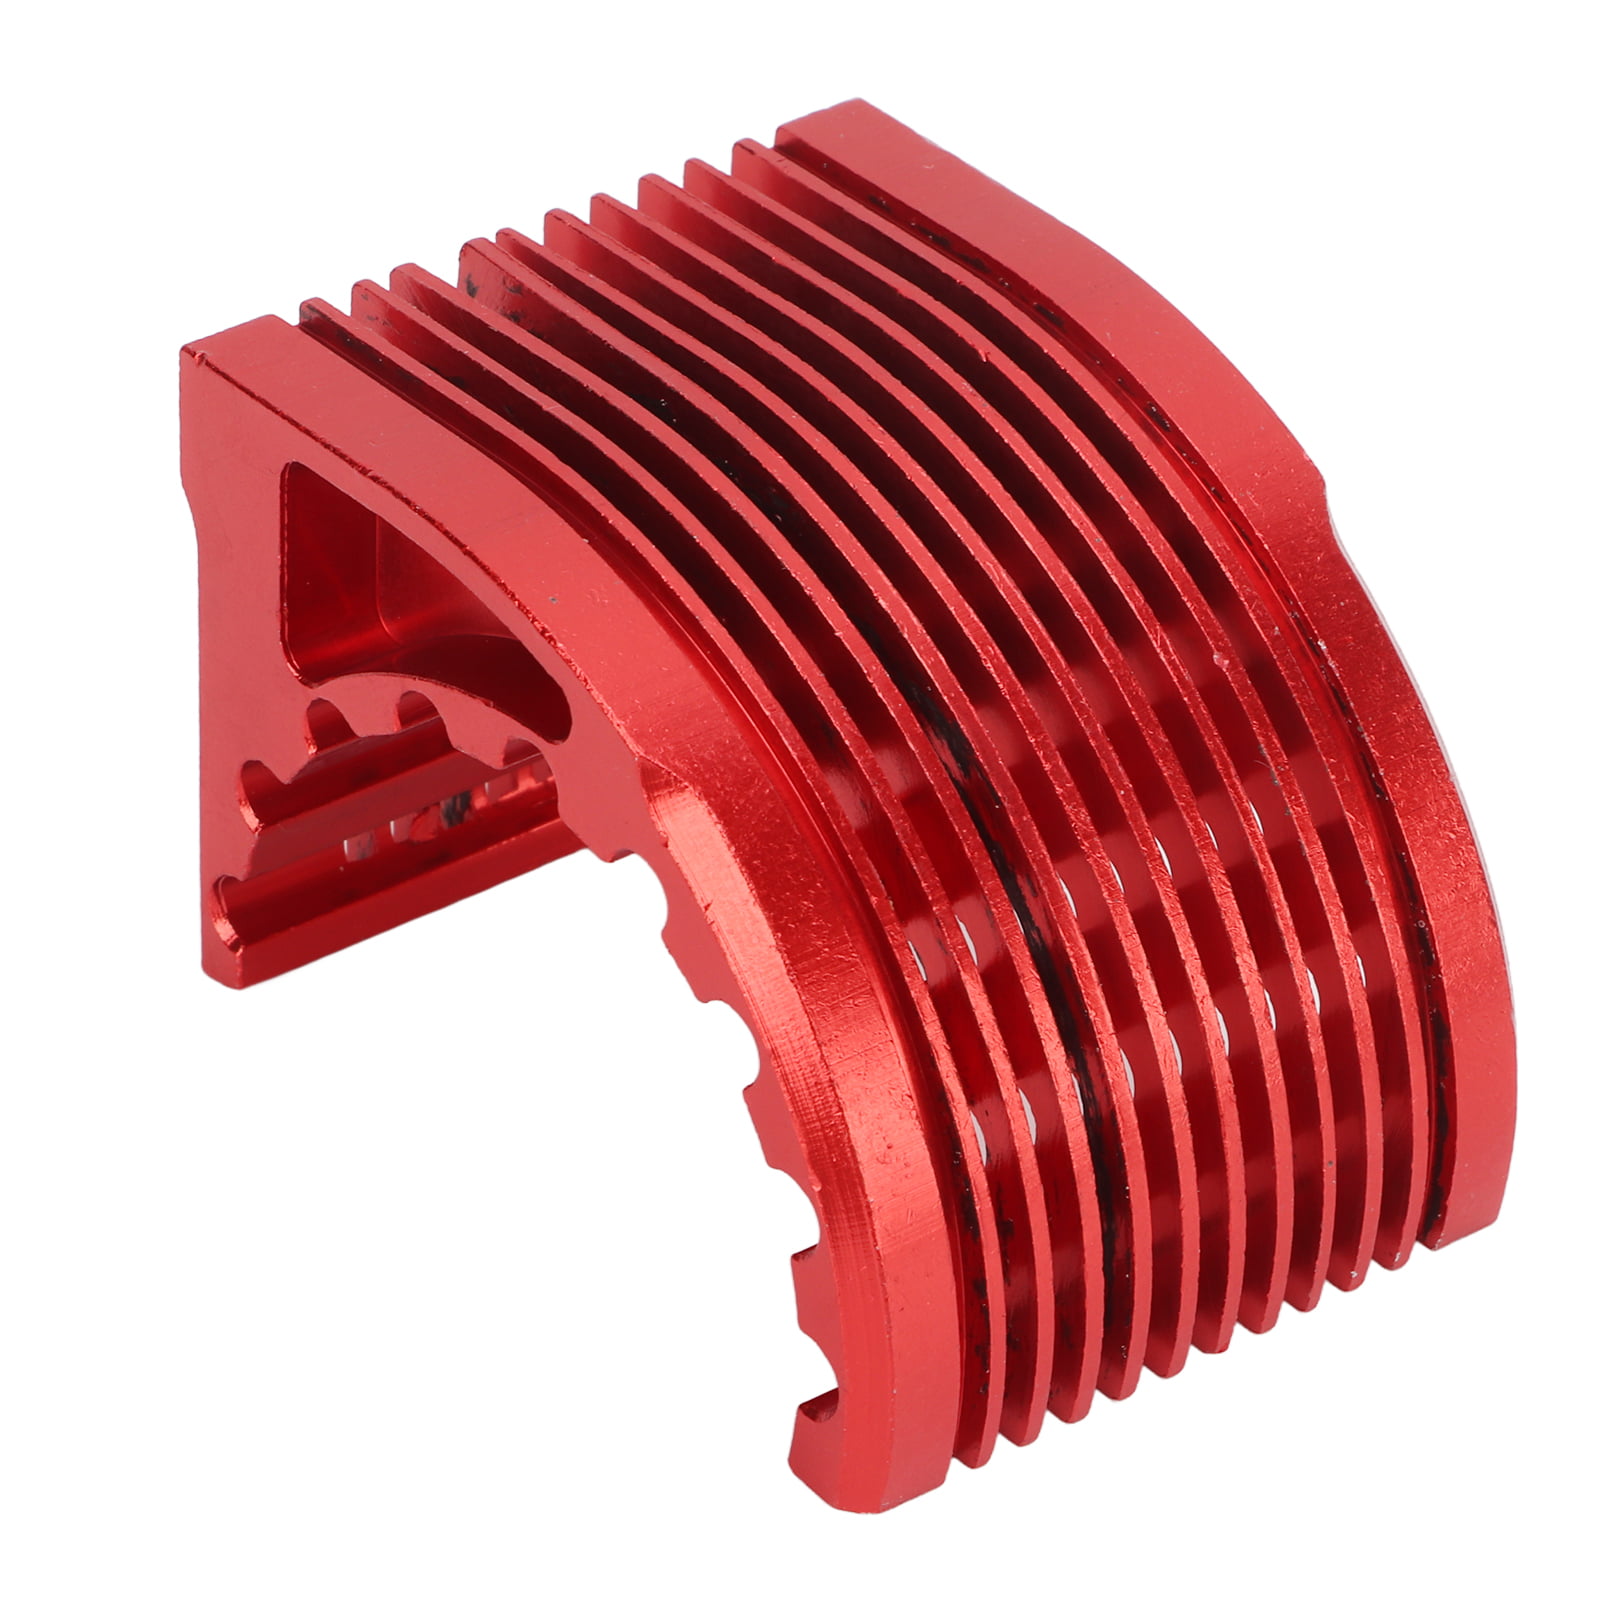 Red Aluminum Alloy Heat Sink Upgrade Spare Part Compatible with 4274 1515 1512 Brushless Motor 42mm RC Motor Heat Sink